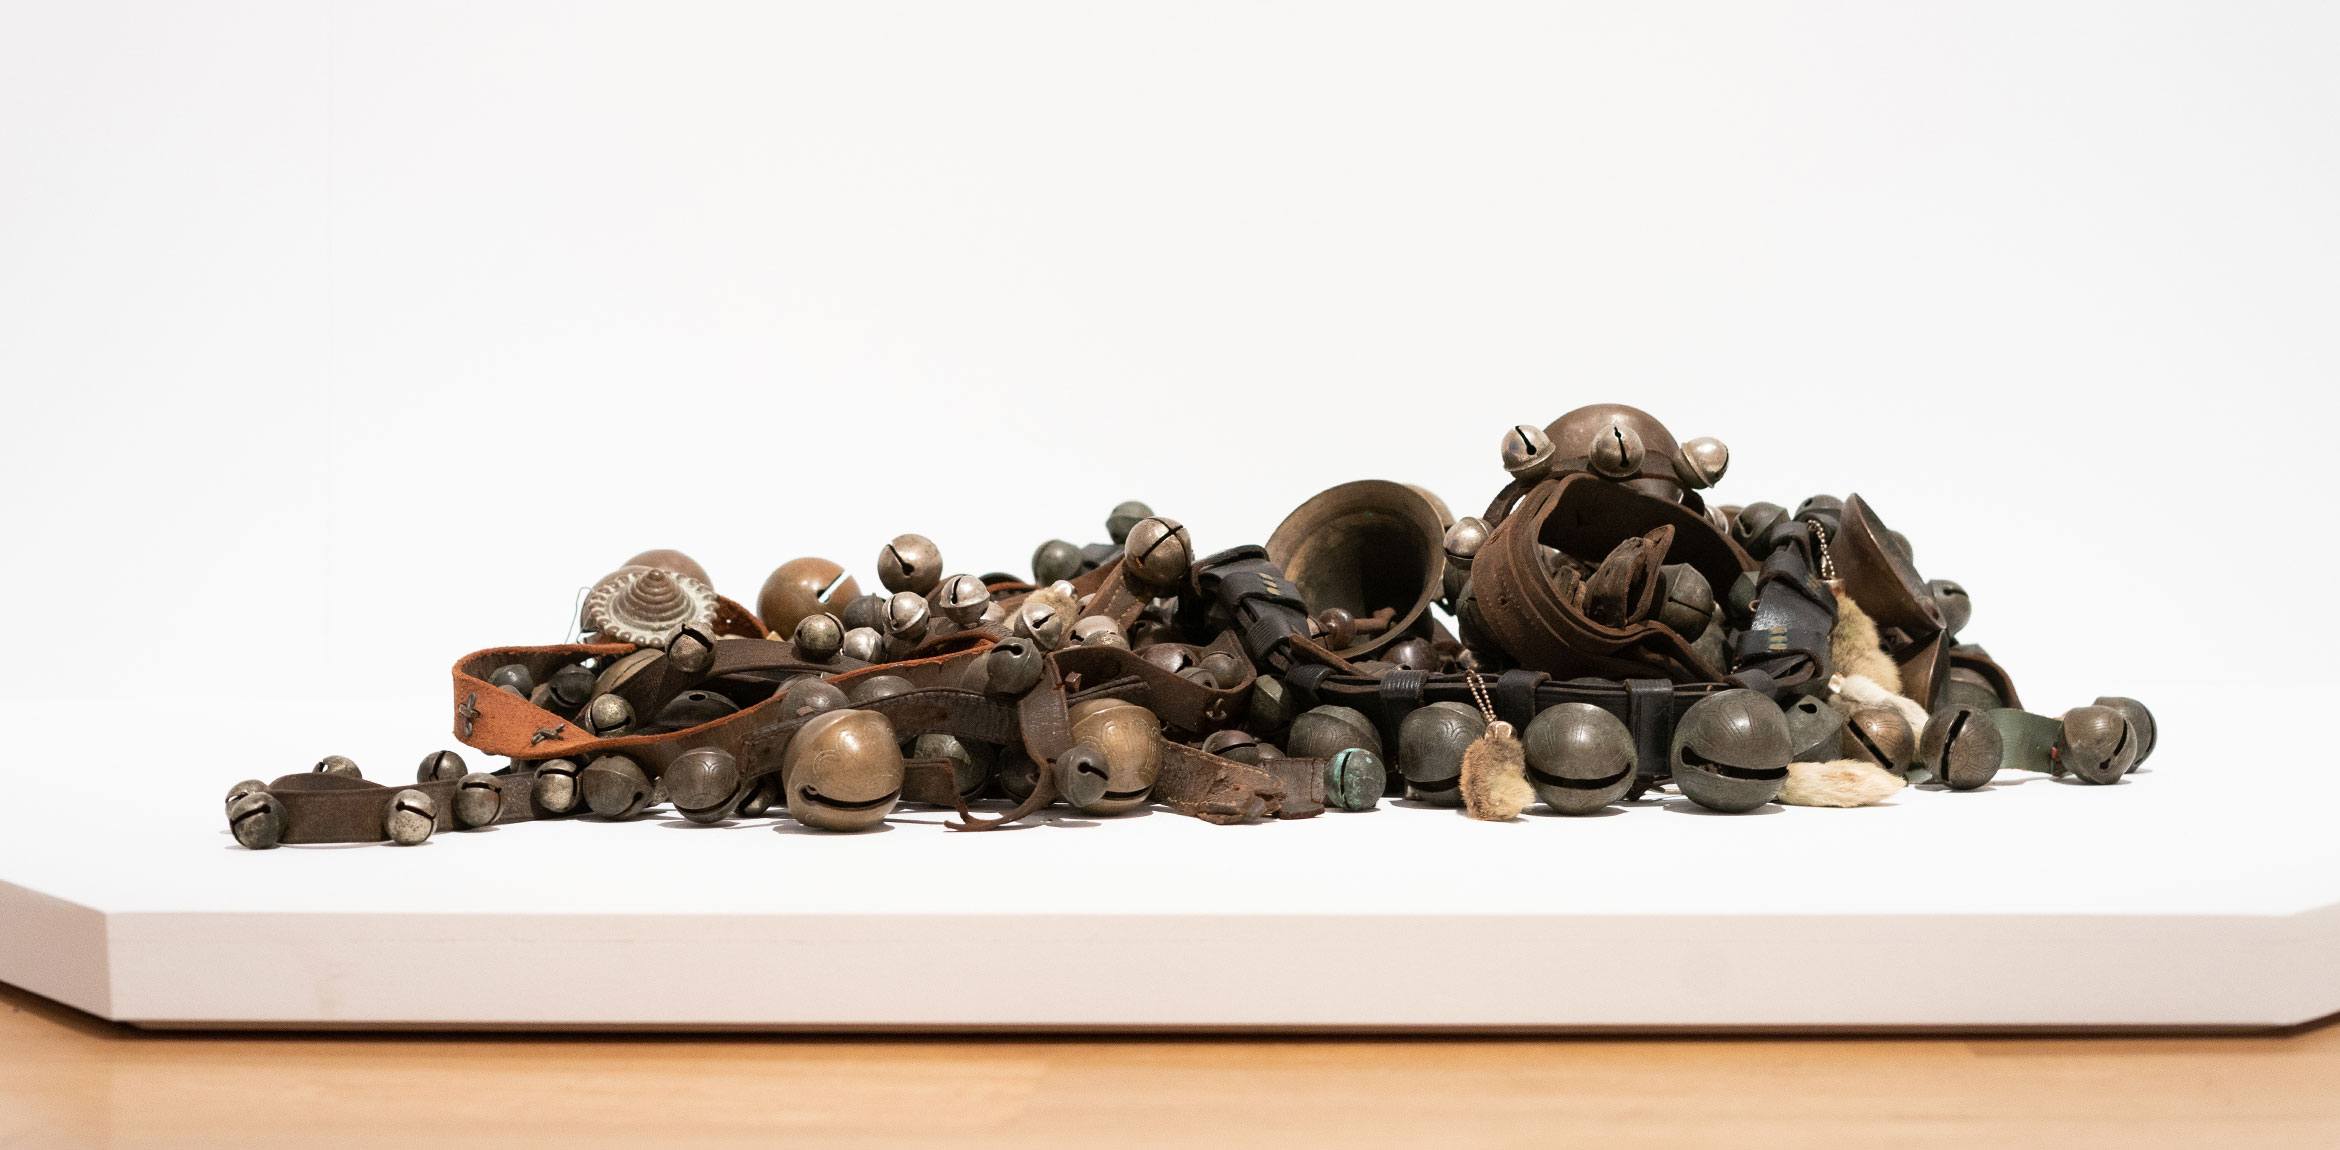 Terry Adkins' "Bells," a pile of metal bells and rabbits' feet fastened to strips of leather.